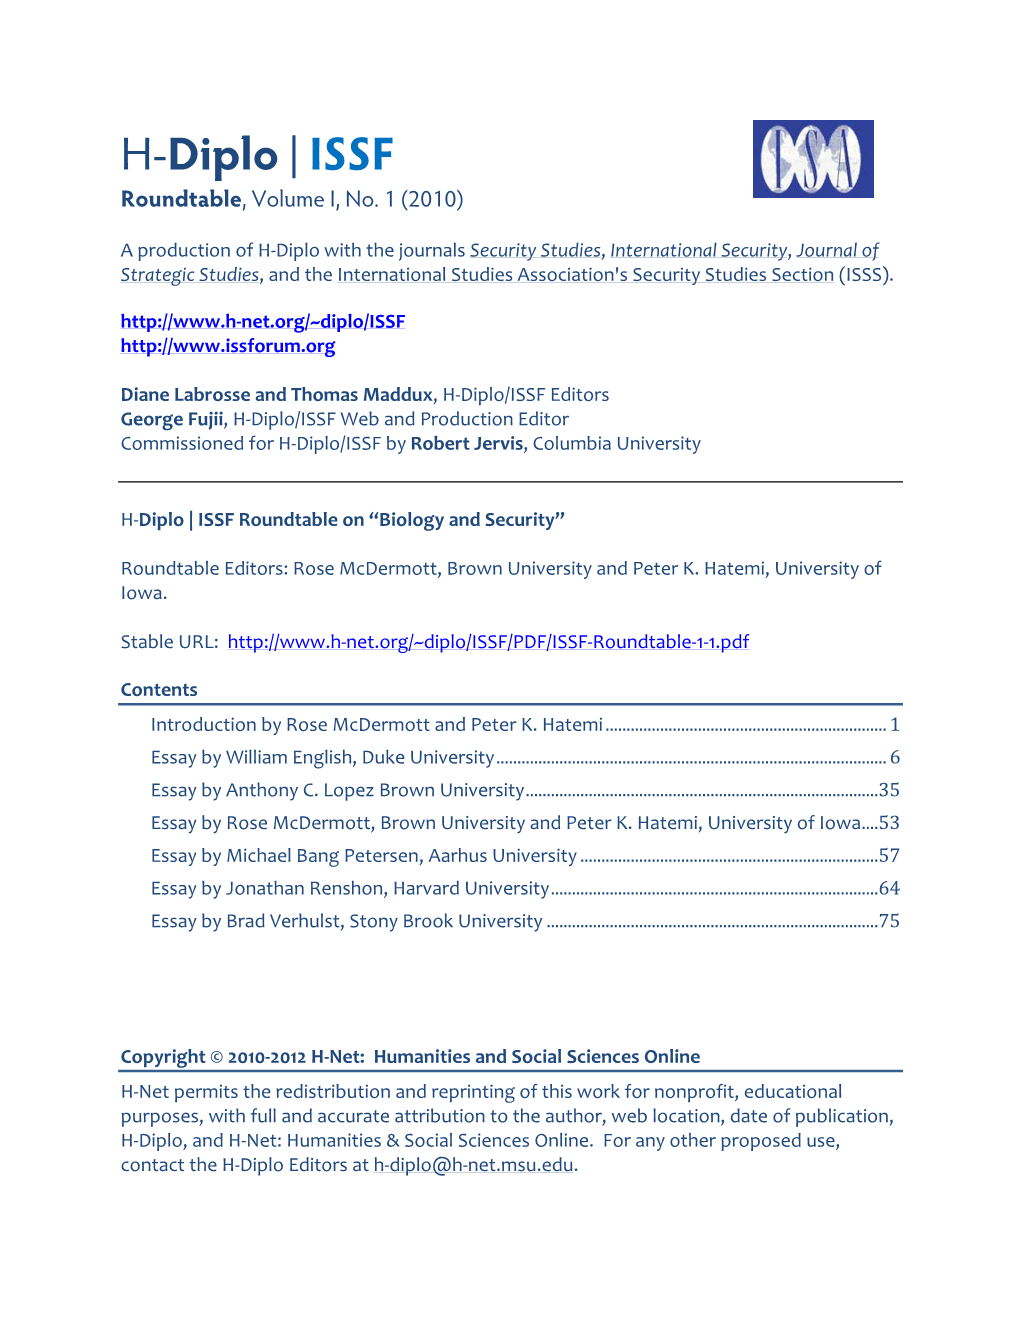 H-Diplo/ISSF Roundtable, Vol. 1, No. 1 (2010)